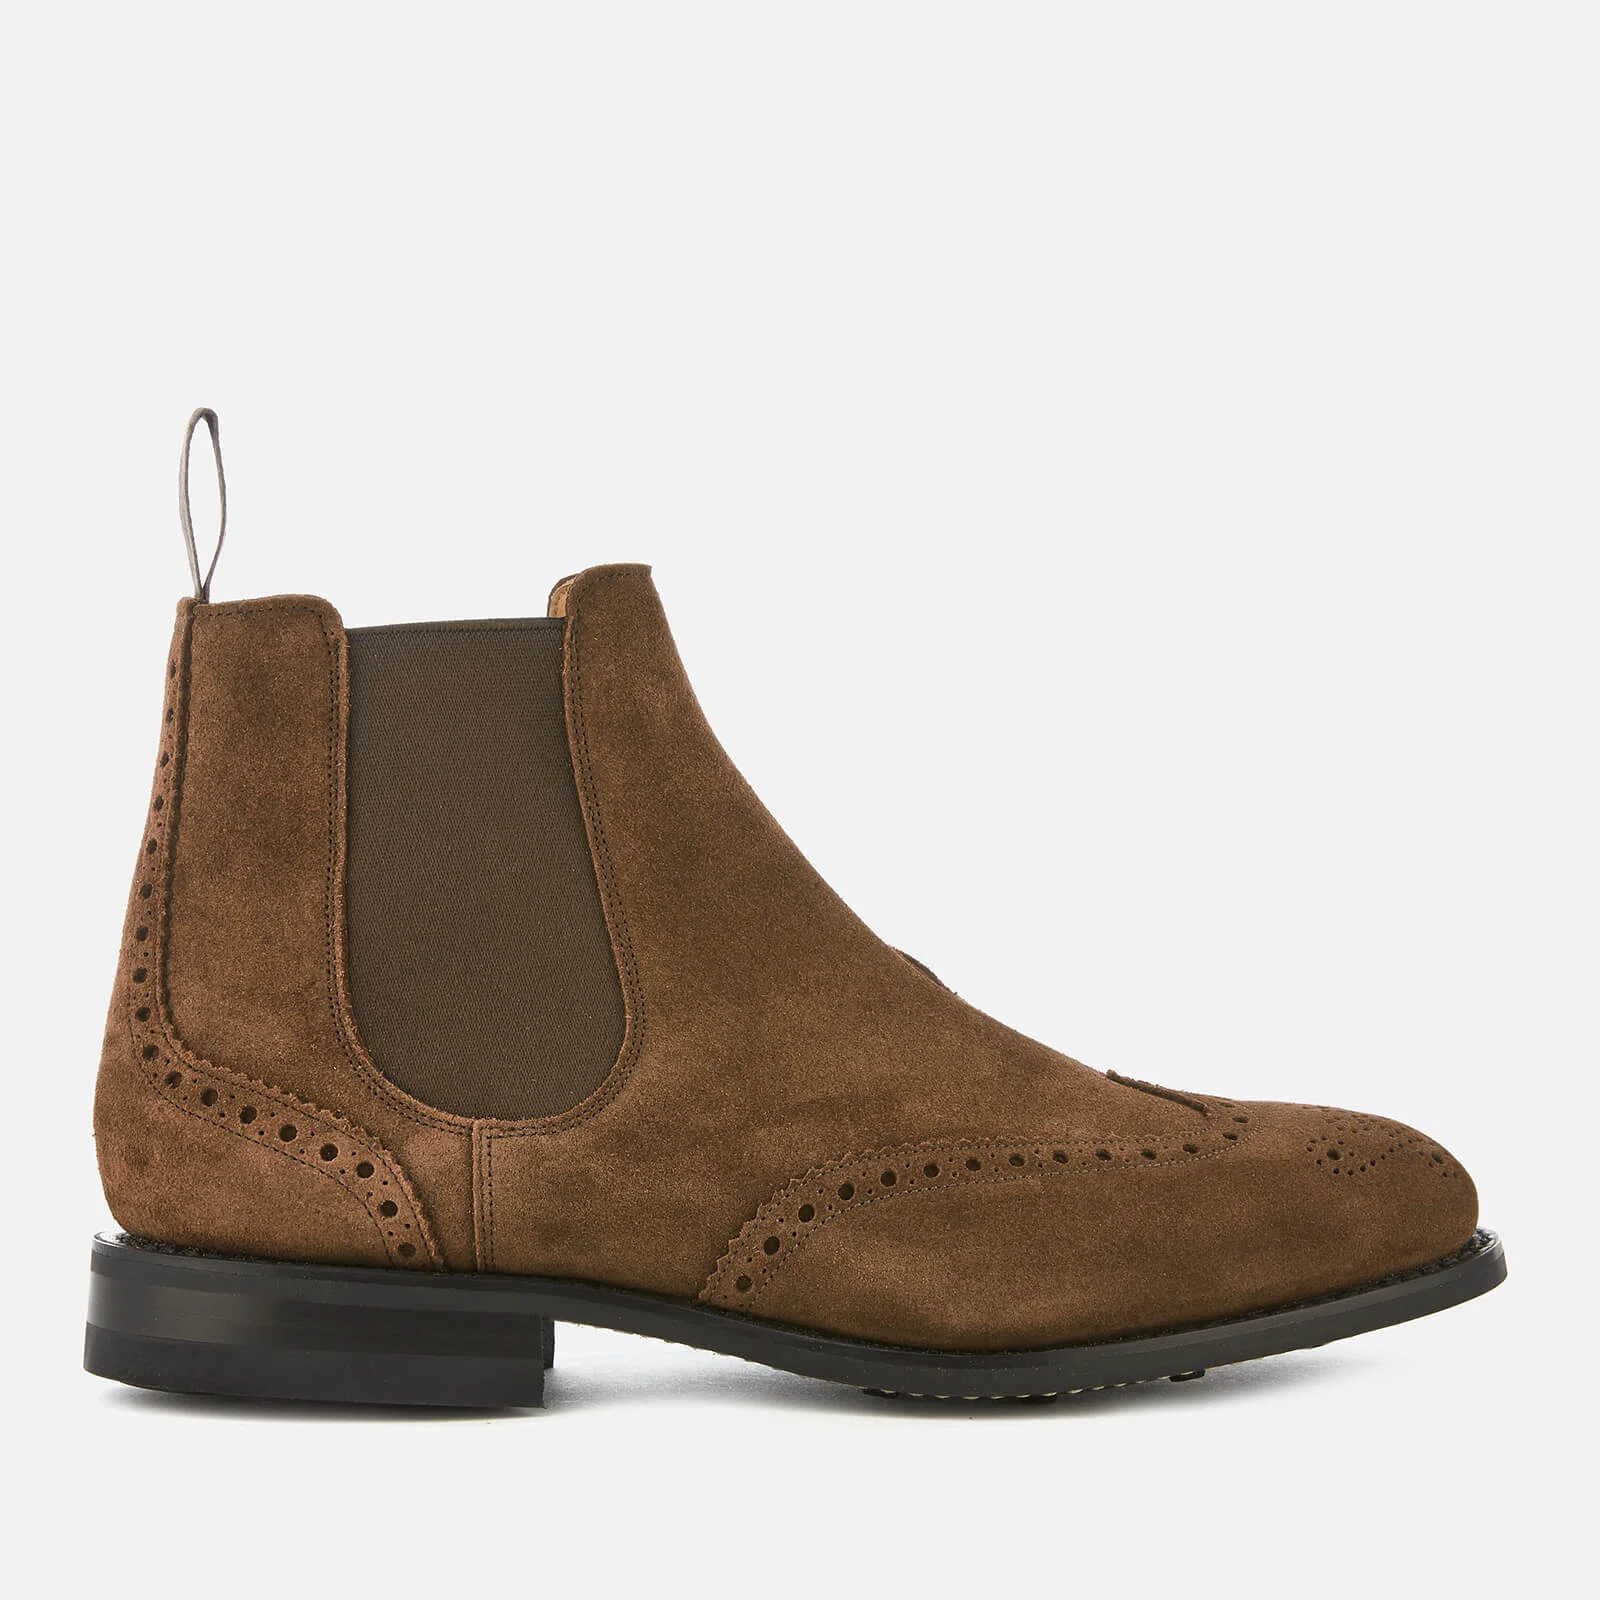 Church's Men's Ravenfield Suede Chelsea Boots - Sigar Image 1